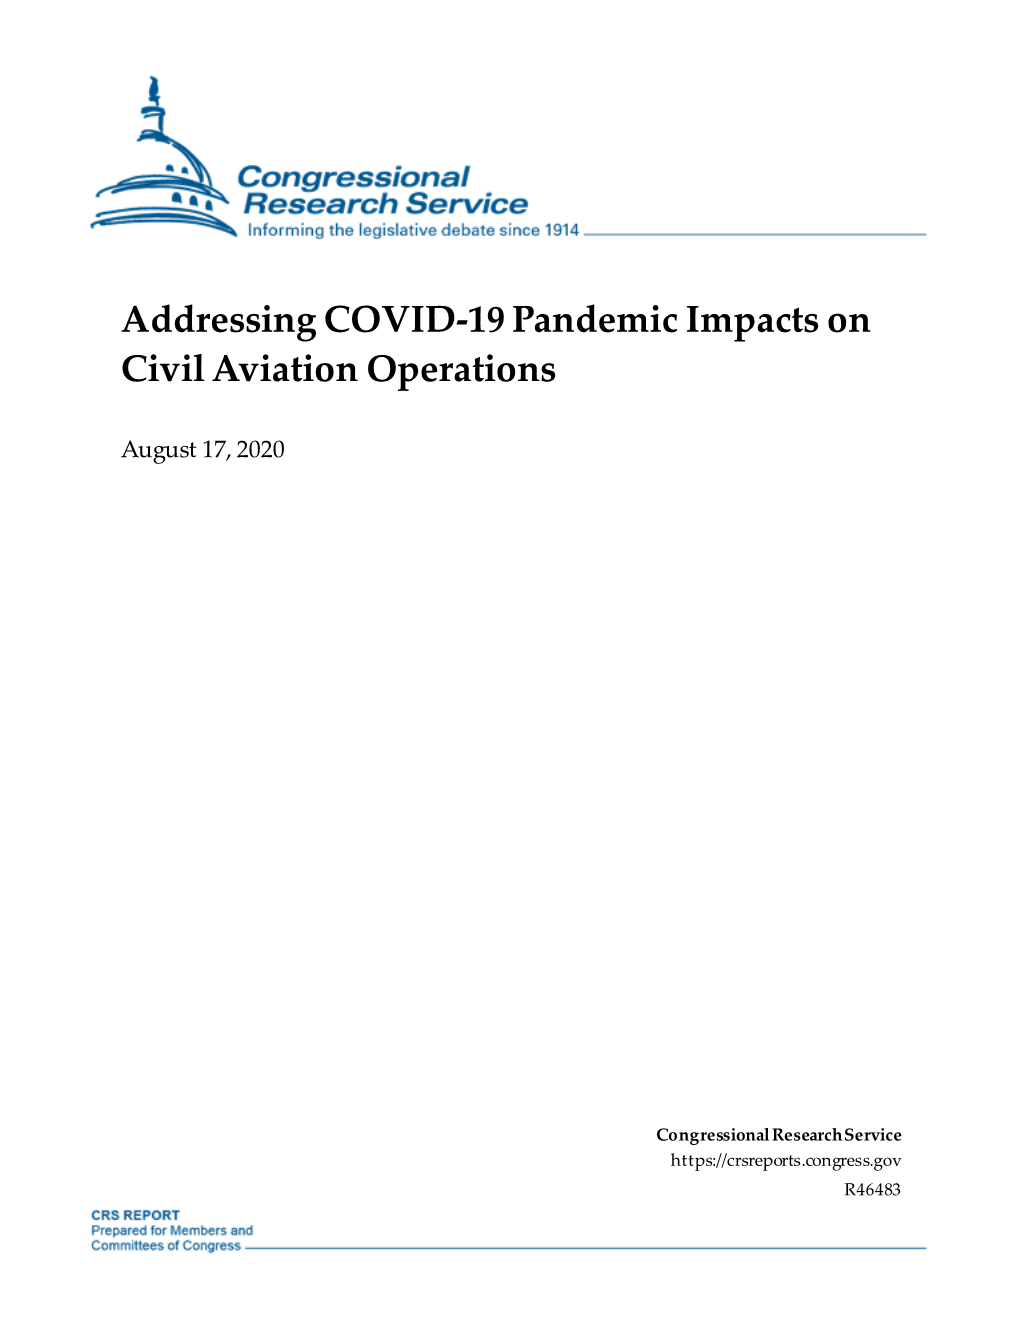 Addressing COVID-19 Pandemic Impacts on Civil Aviation Operations